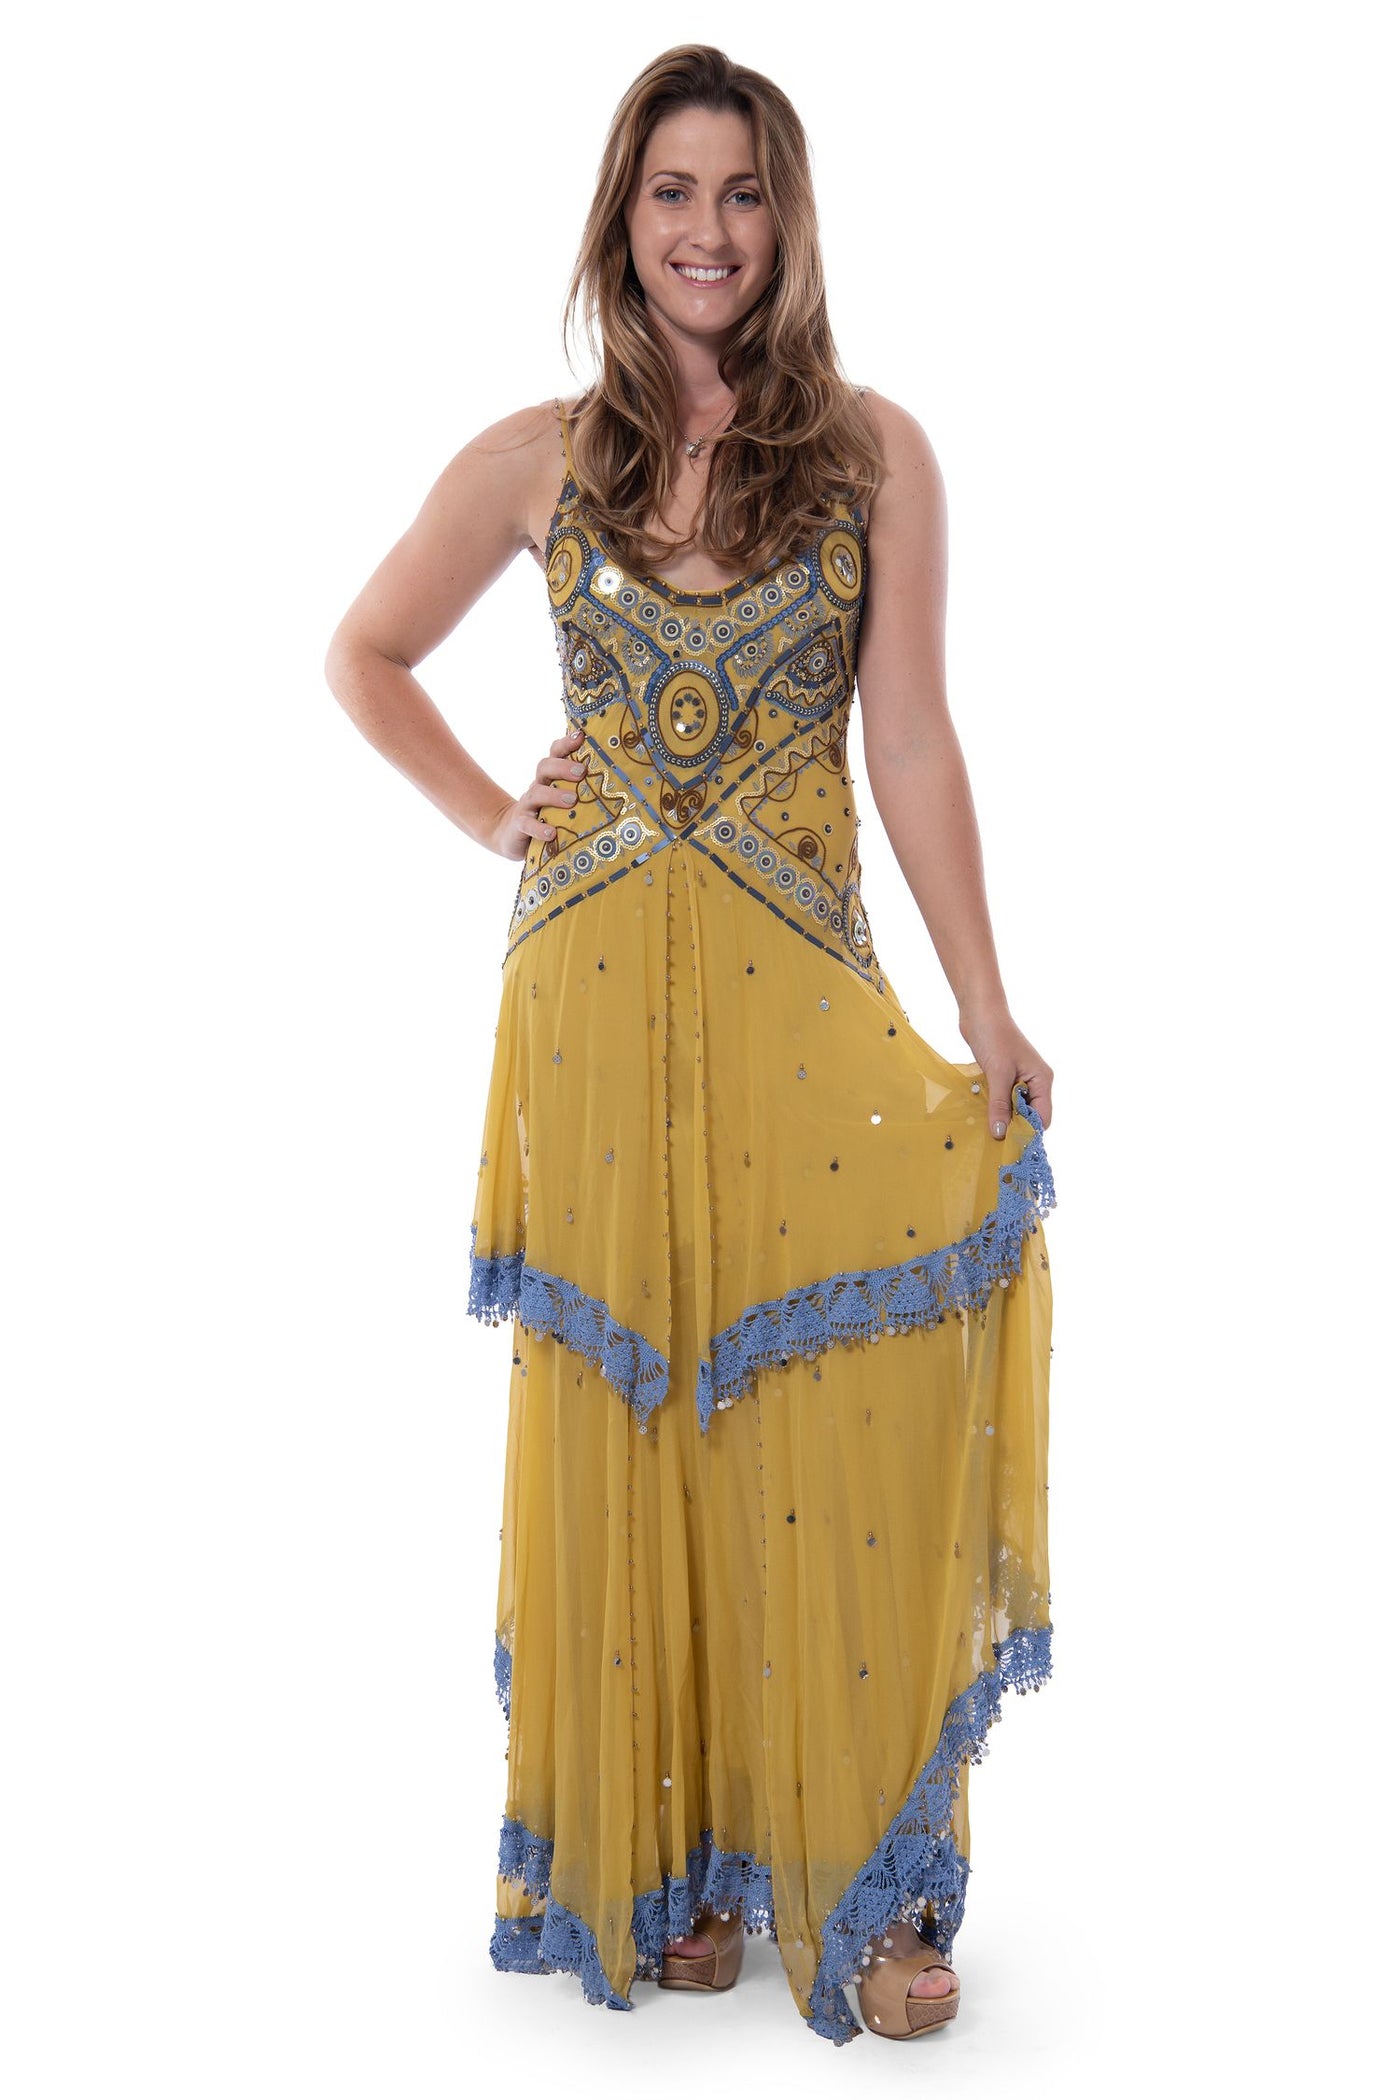 Jenny Packham yellow and blue highly embroidered long strappy dress